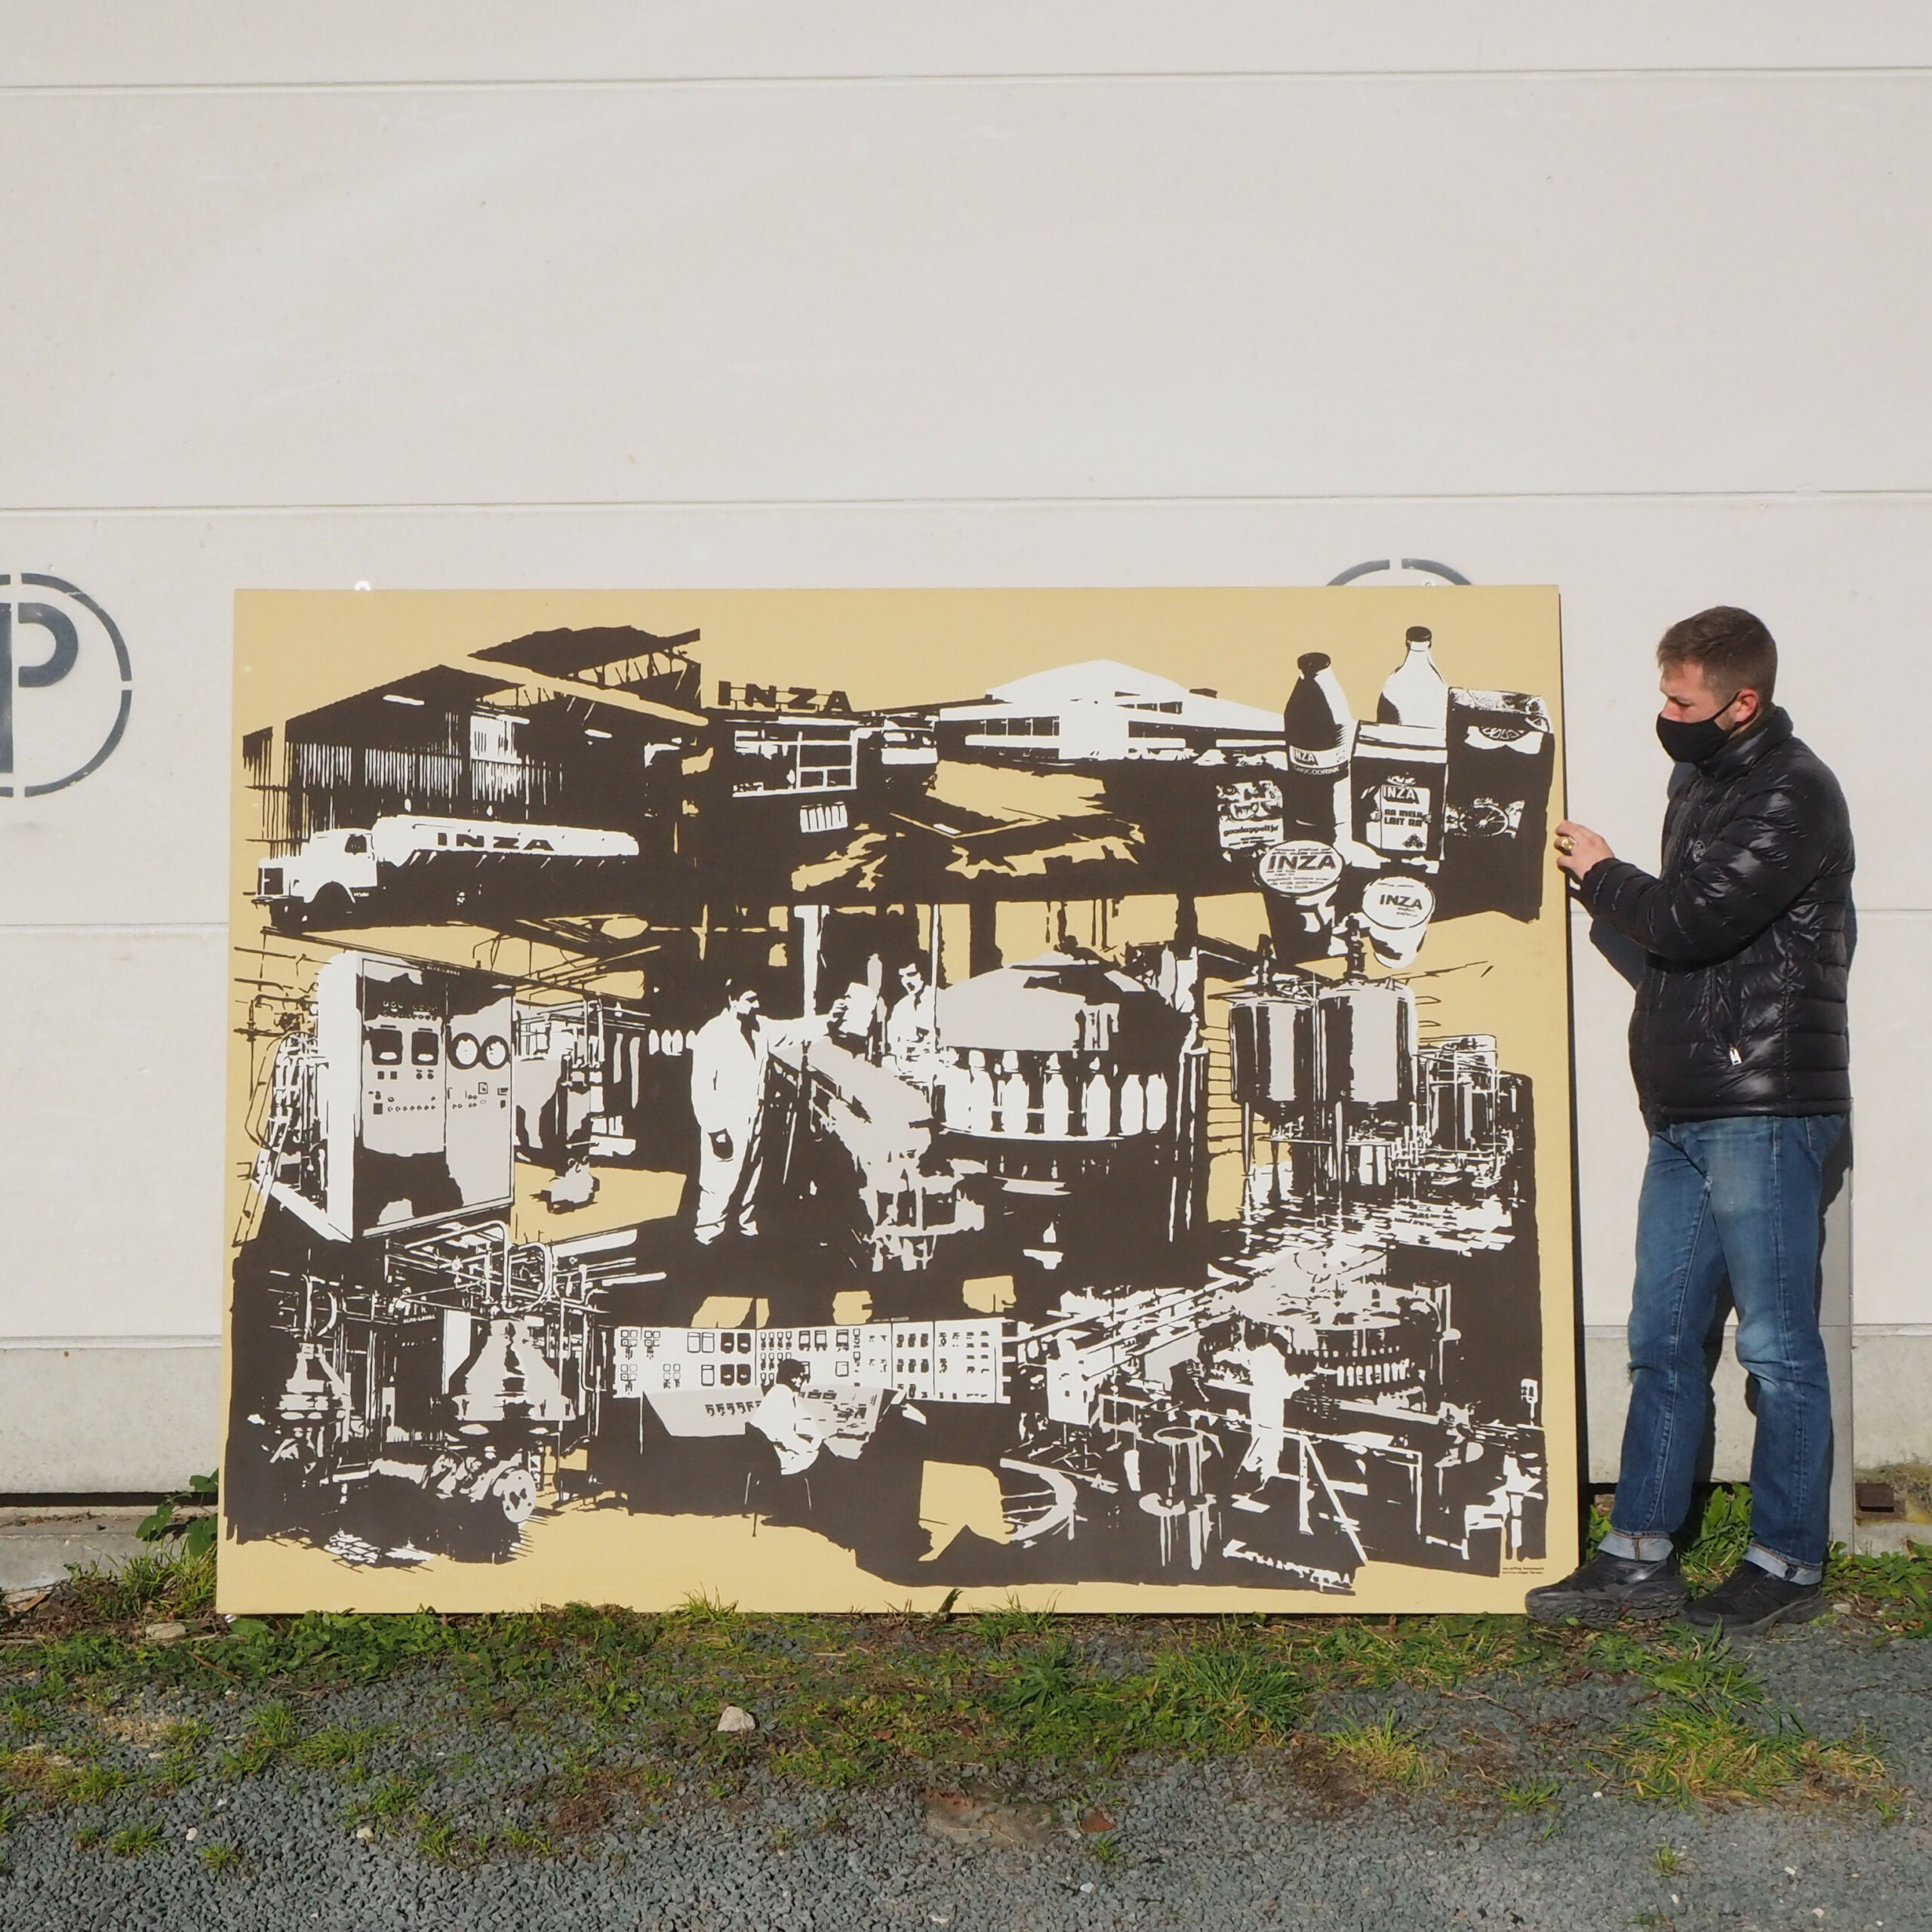 Large painting by Erling Hansmark &amp; Wagn Larsen for Inza (180 x 236 cm)